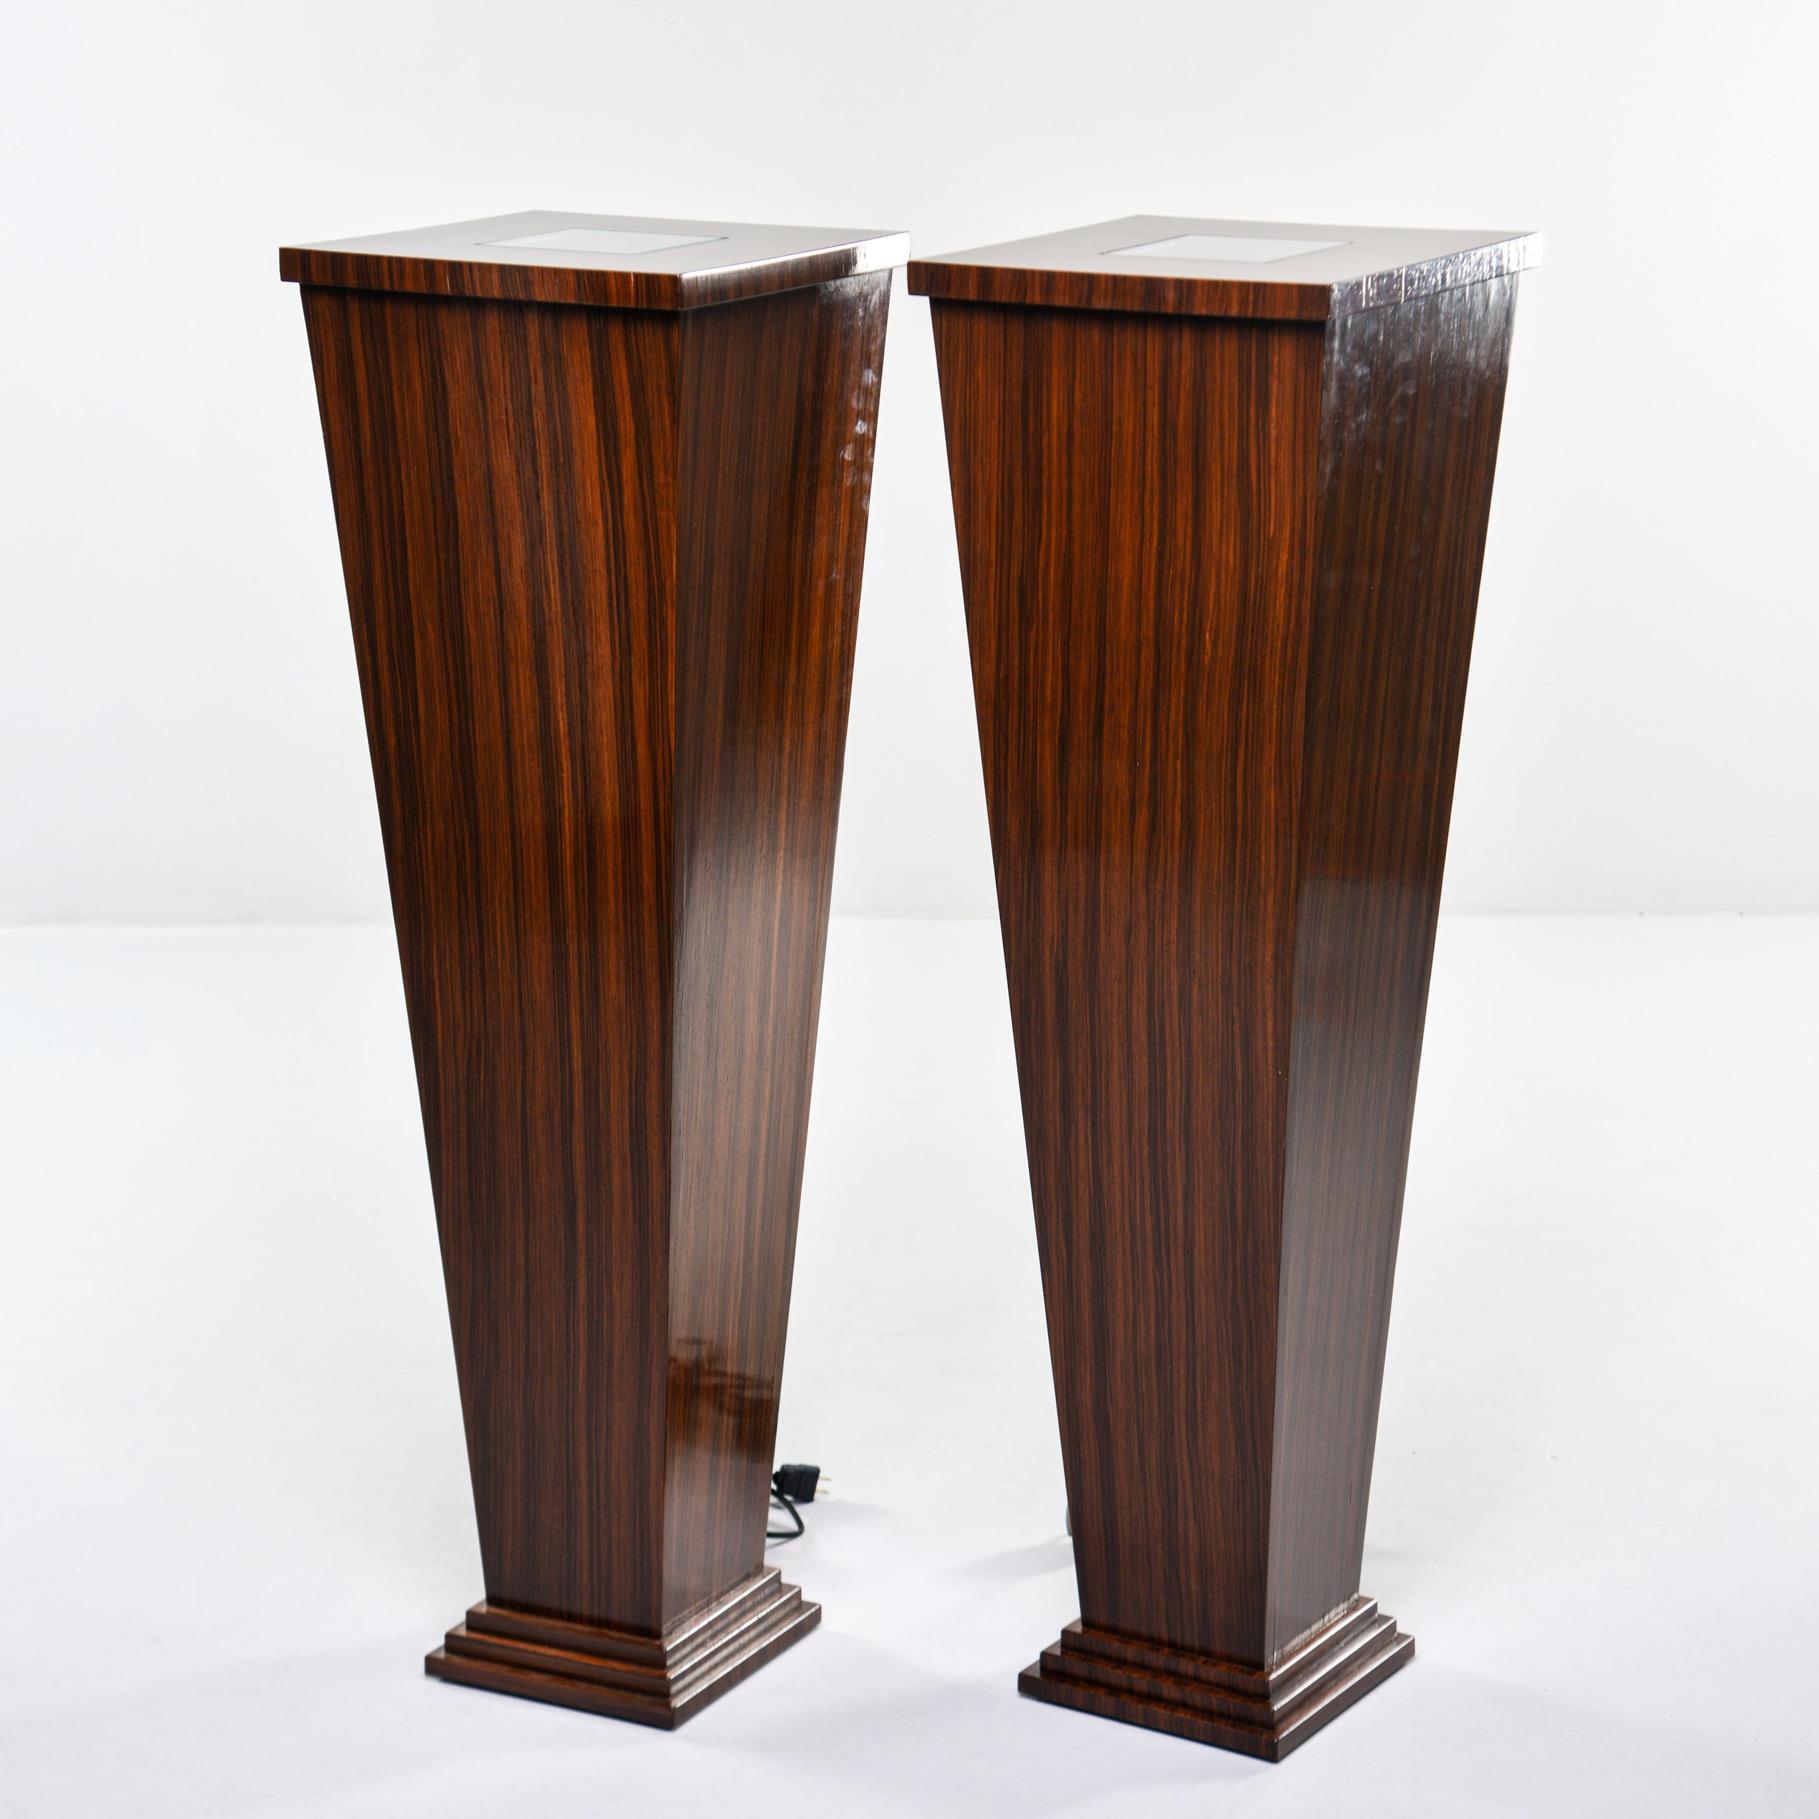 Contemporary Pair of Tall Bespoke Walnut Display Stands with Interior under Light